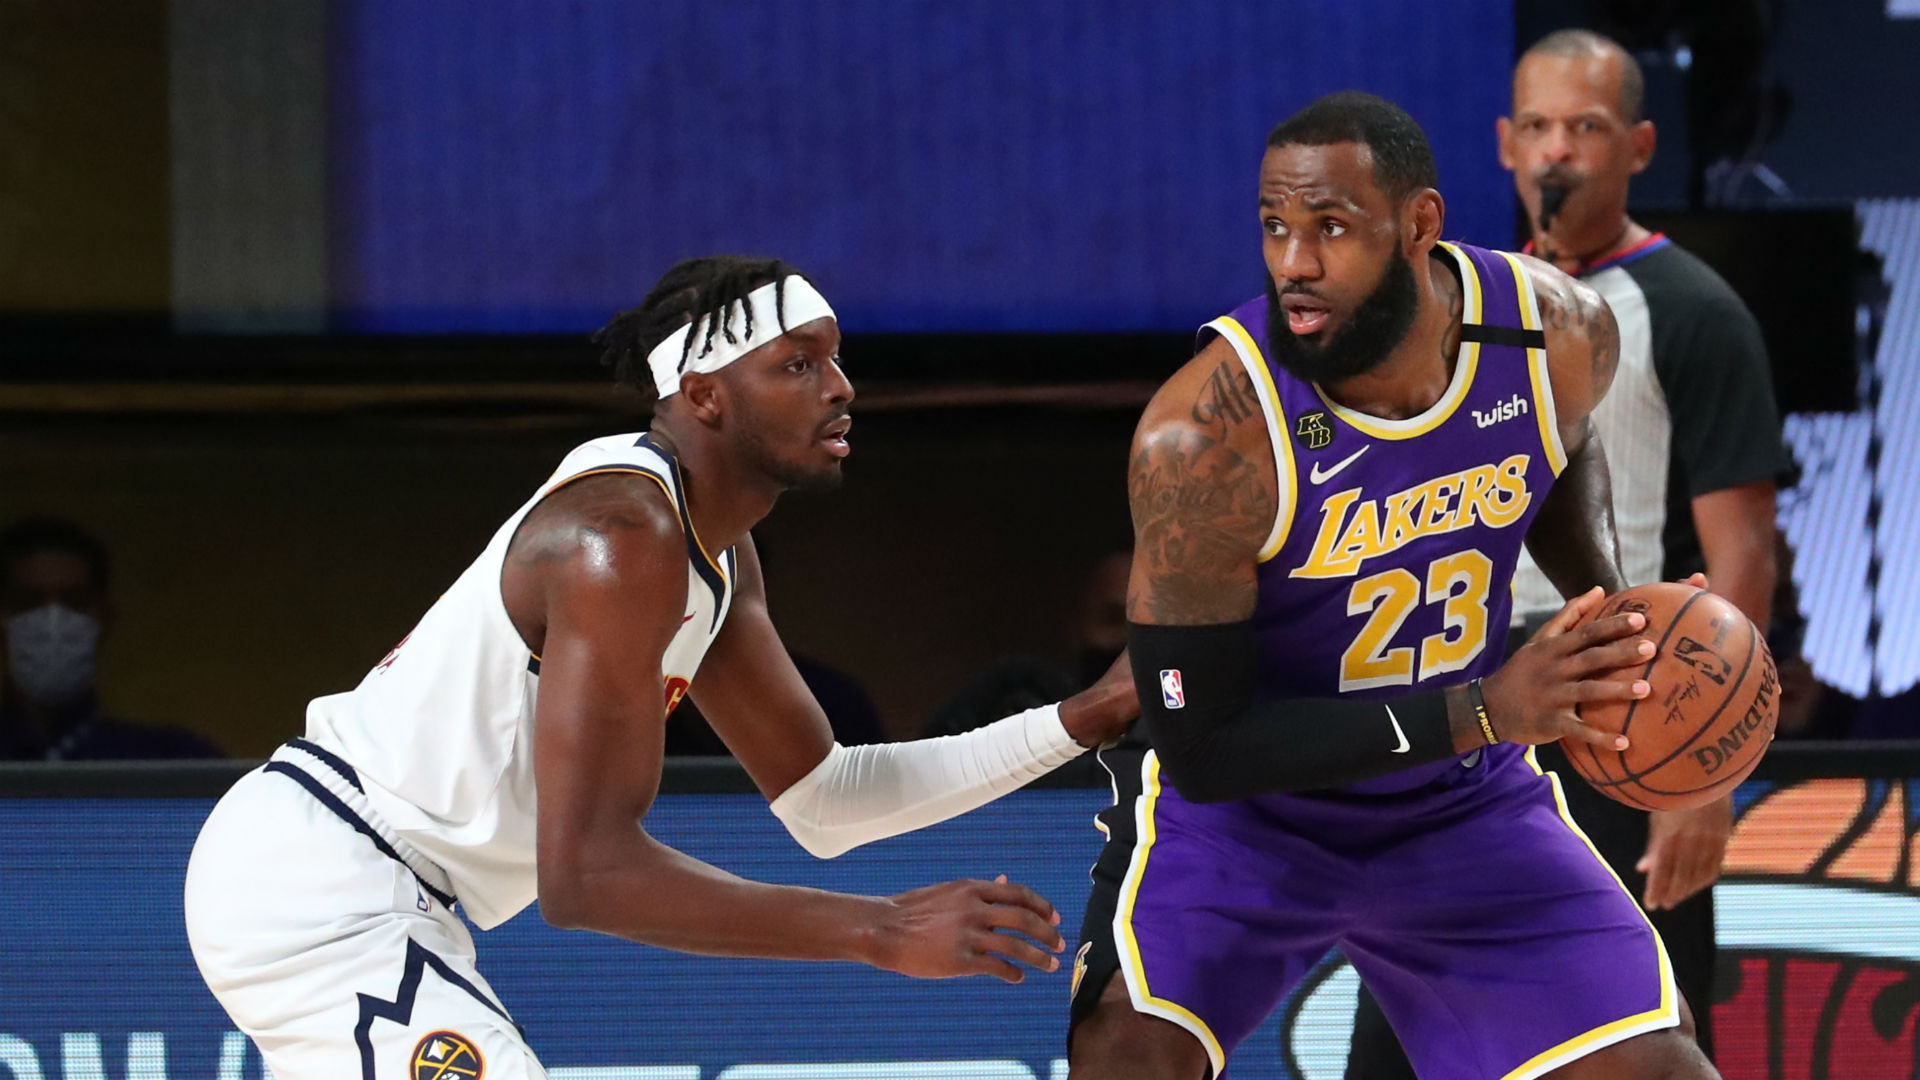 A win over the Denver Nuggets secured a 10th NBA Finals for LeBron James, who led the way for the Los Angeles Lakers with a triple-double.